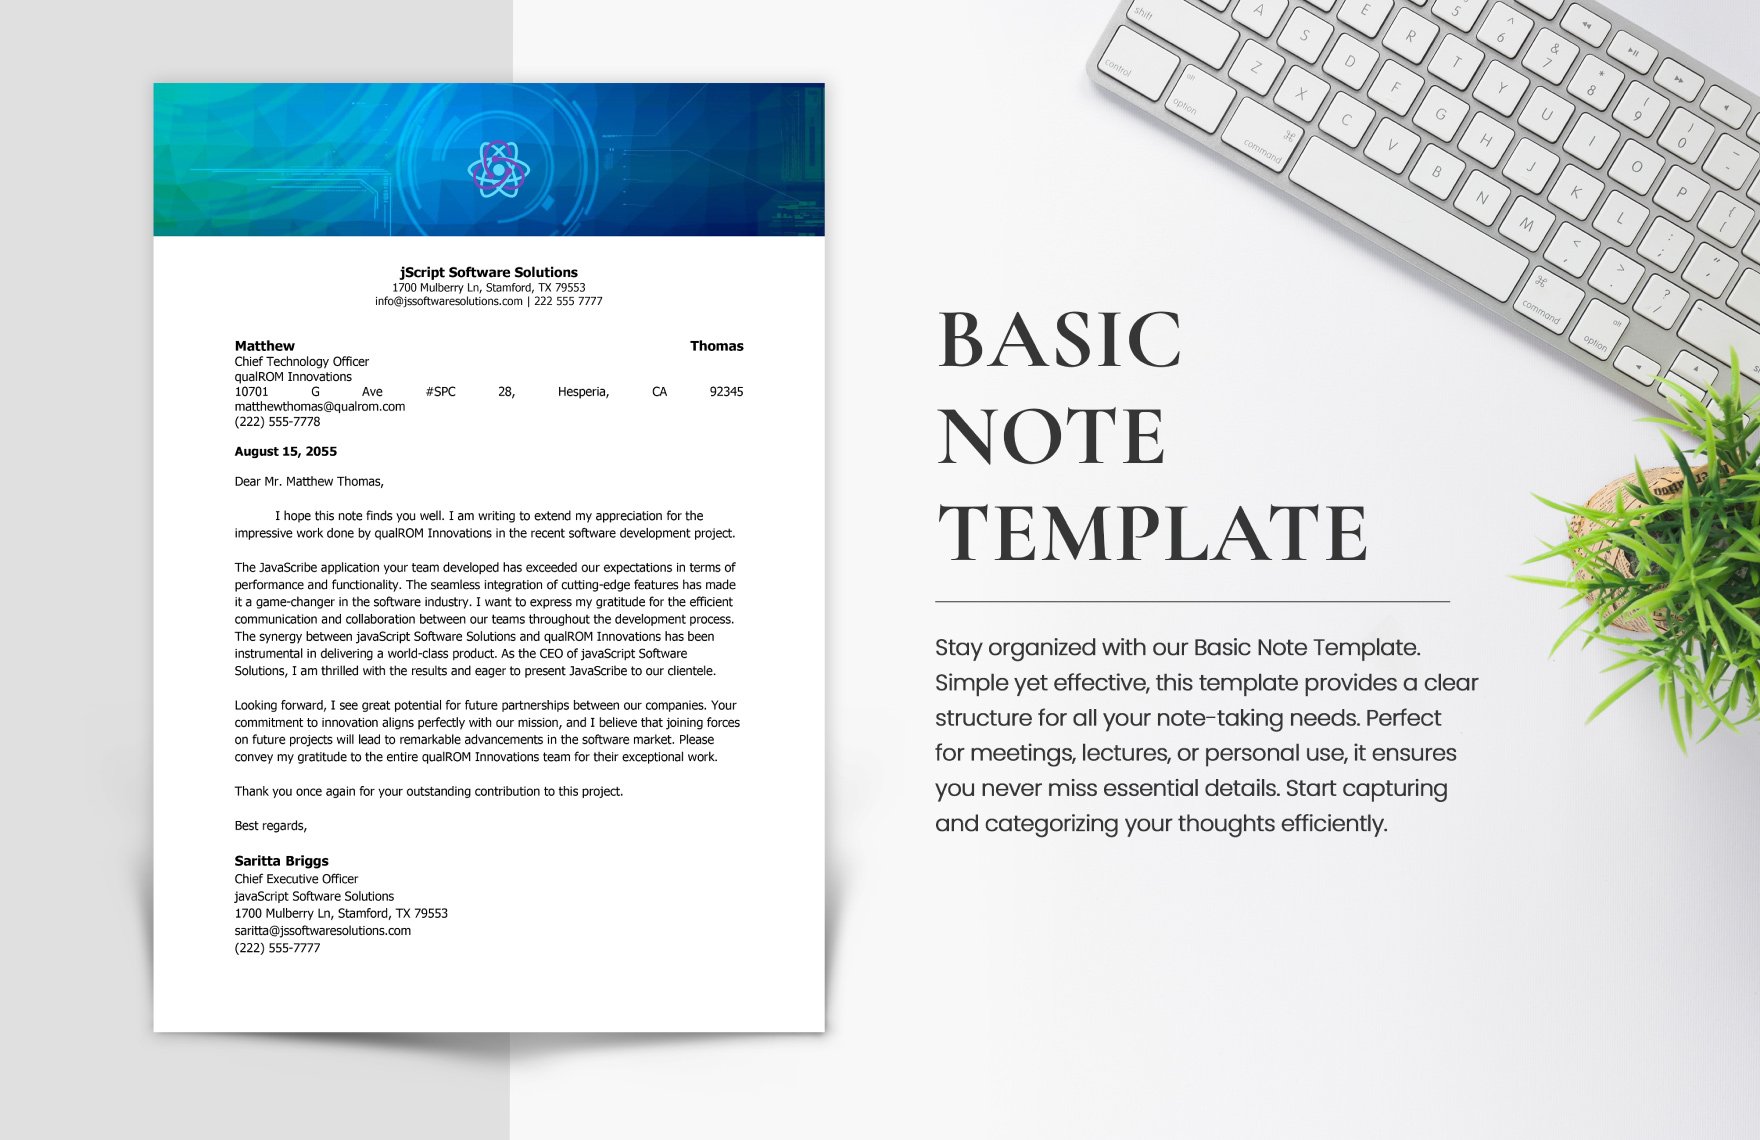 Basic Note Template